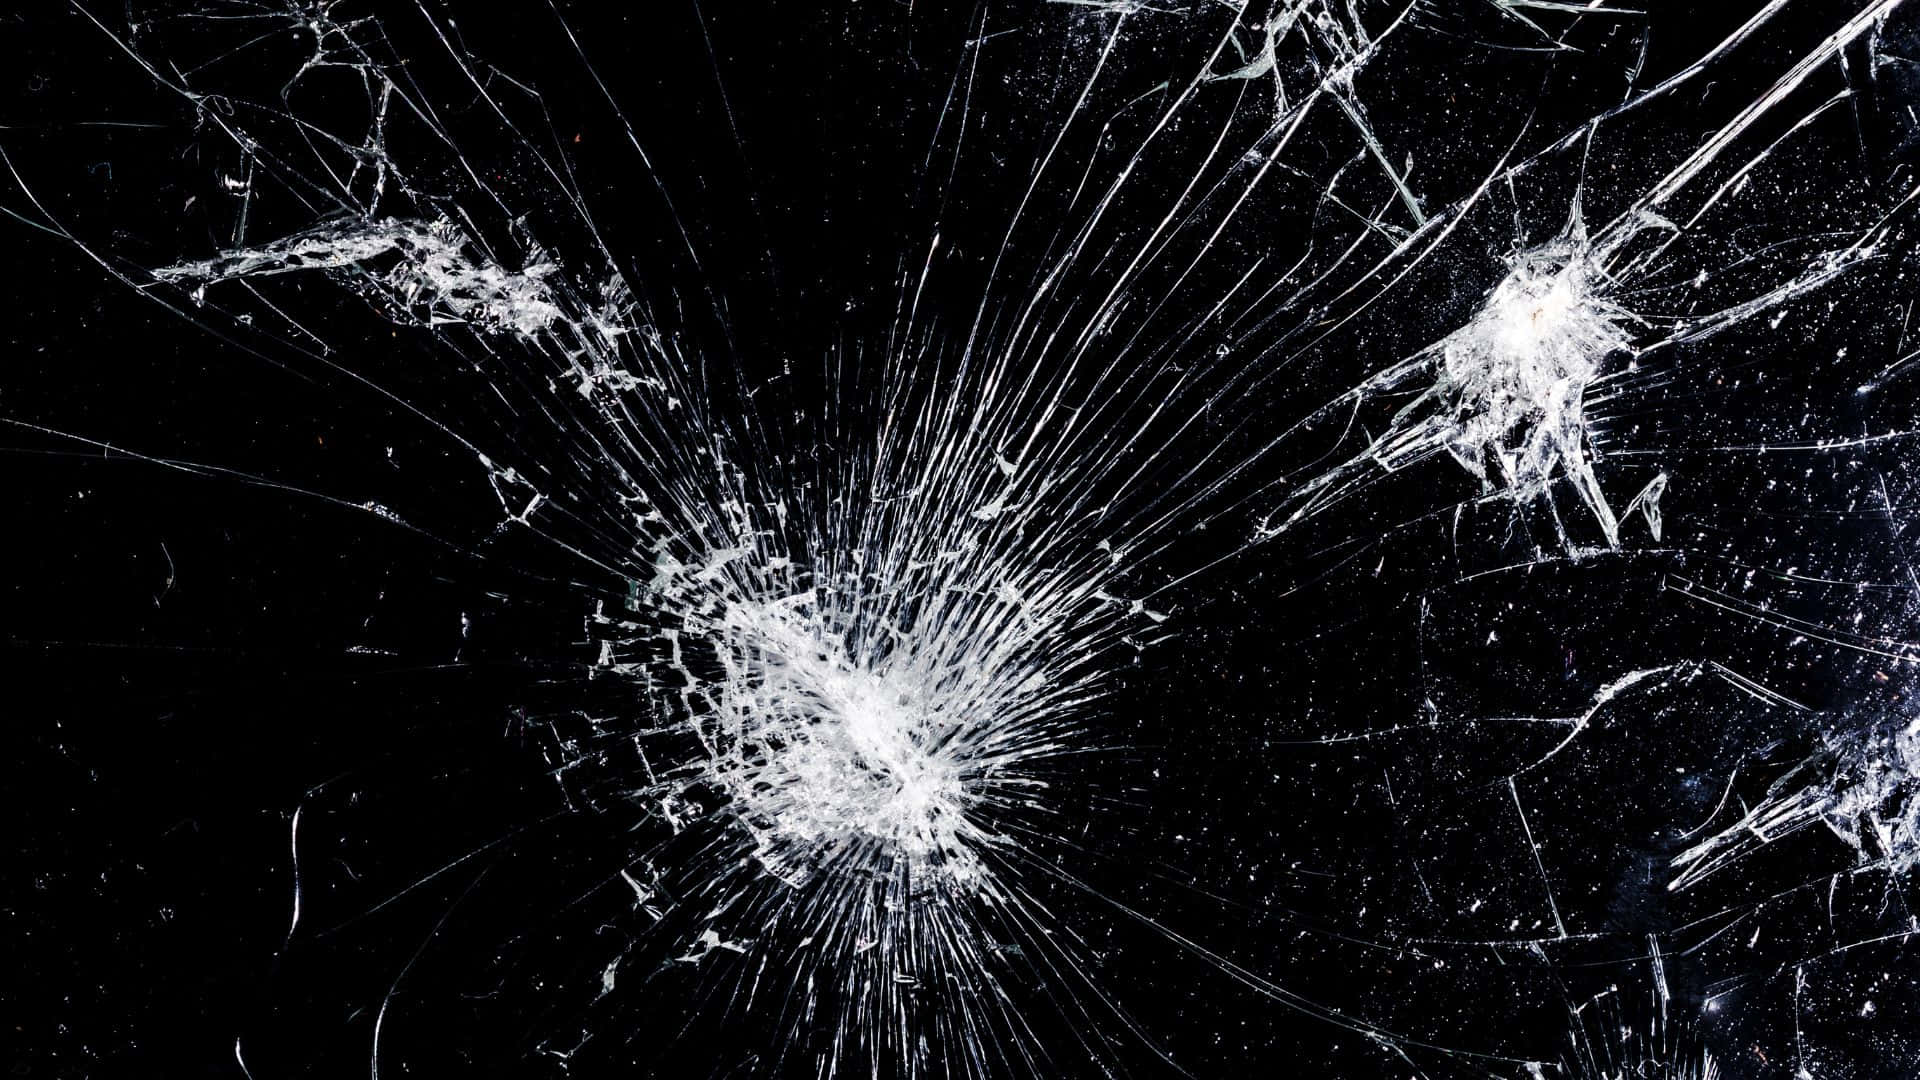 A Broken Glass With A Black Background